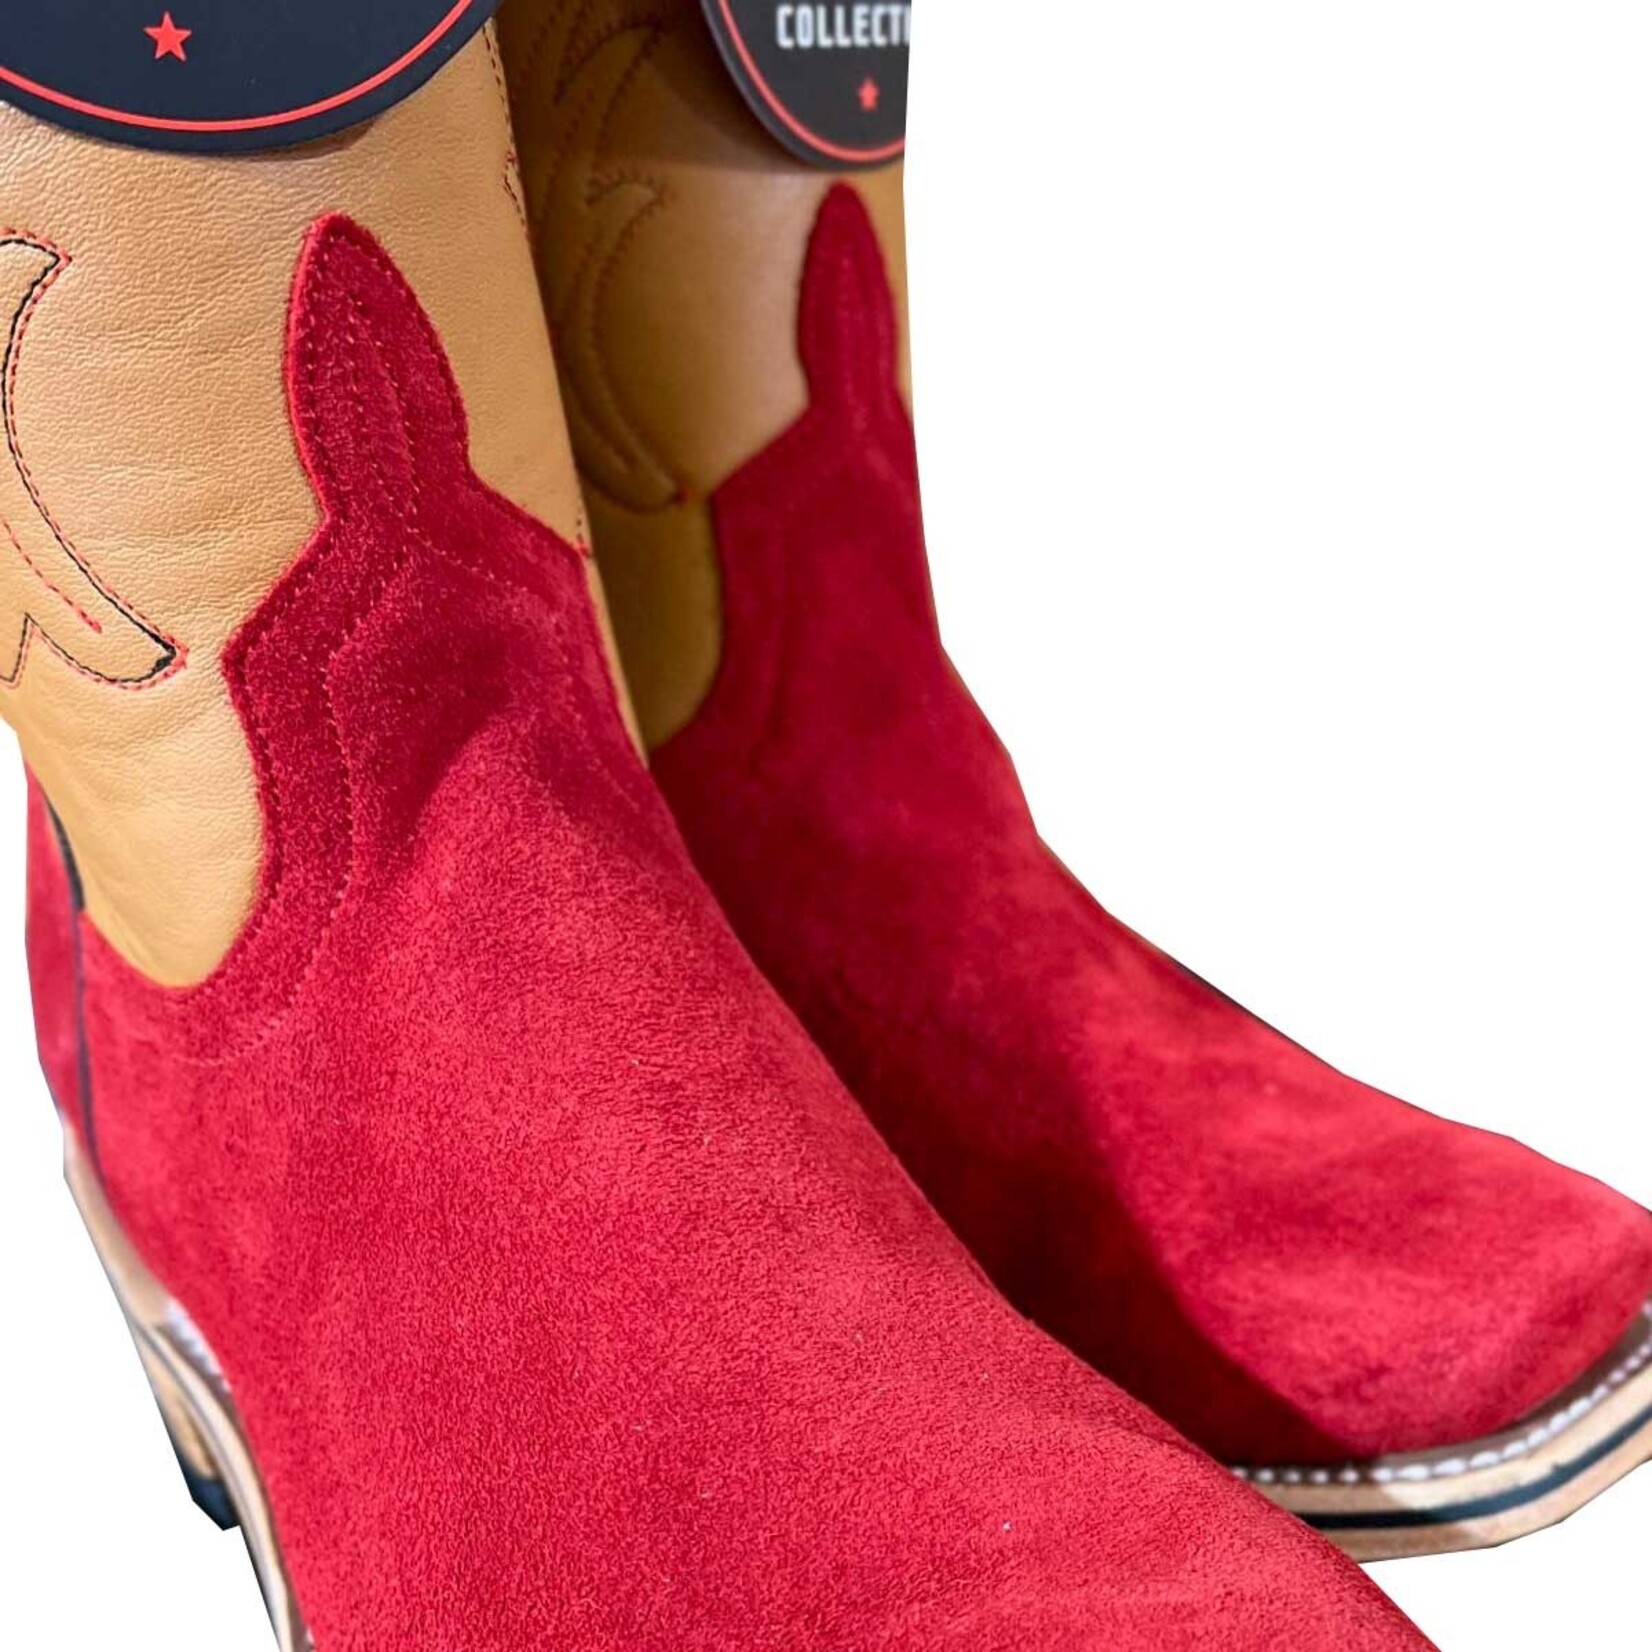 Horse Power Horse Power HP9516 Men's High Noon Red Suede